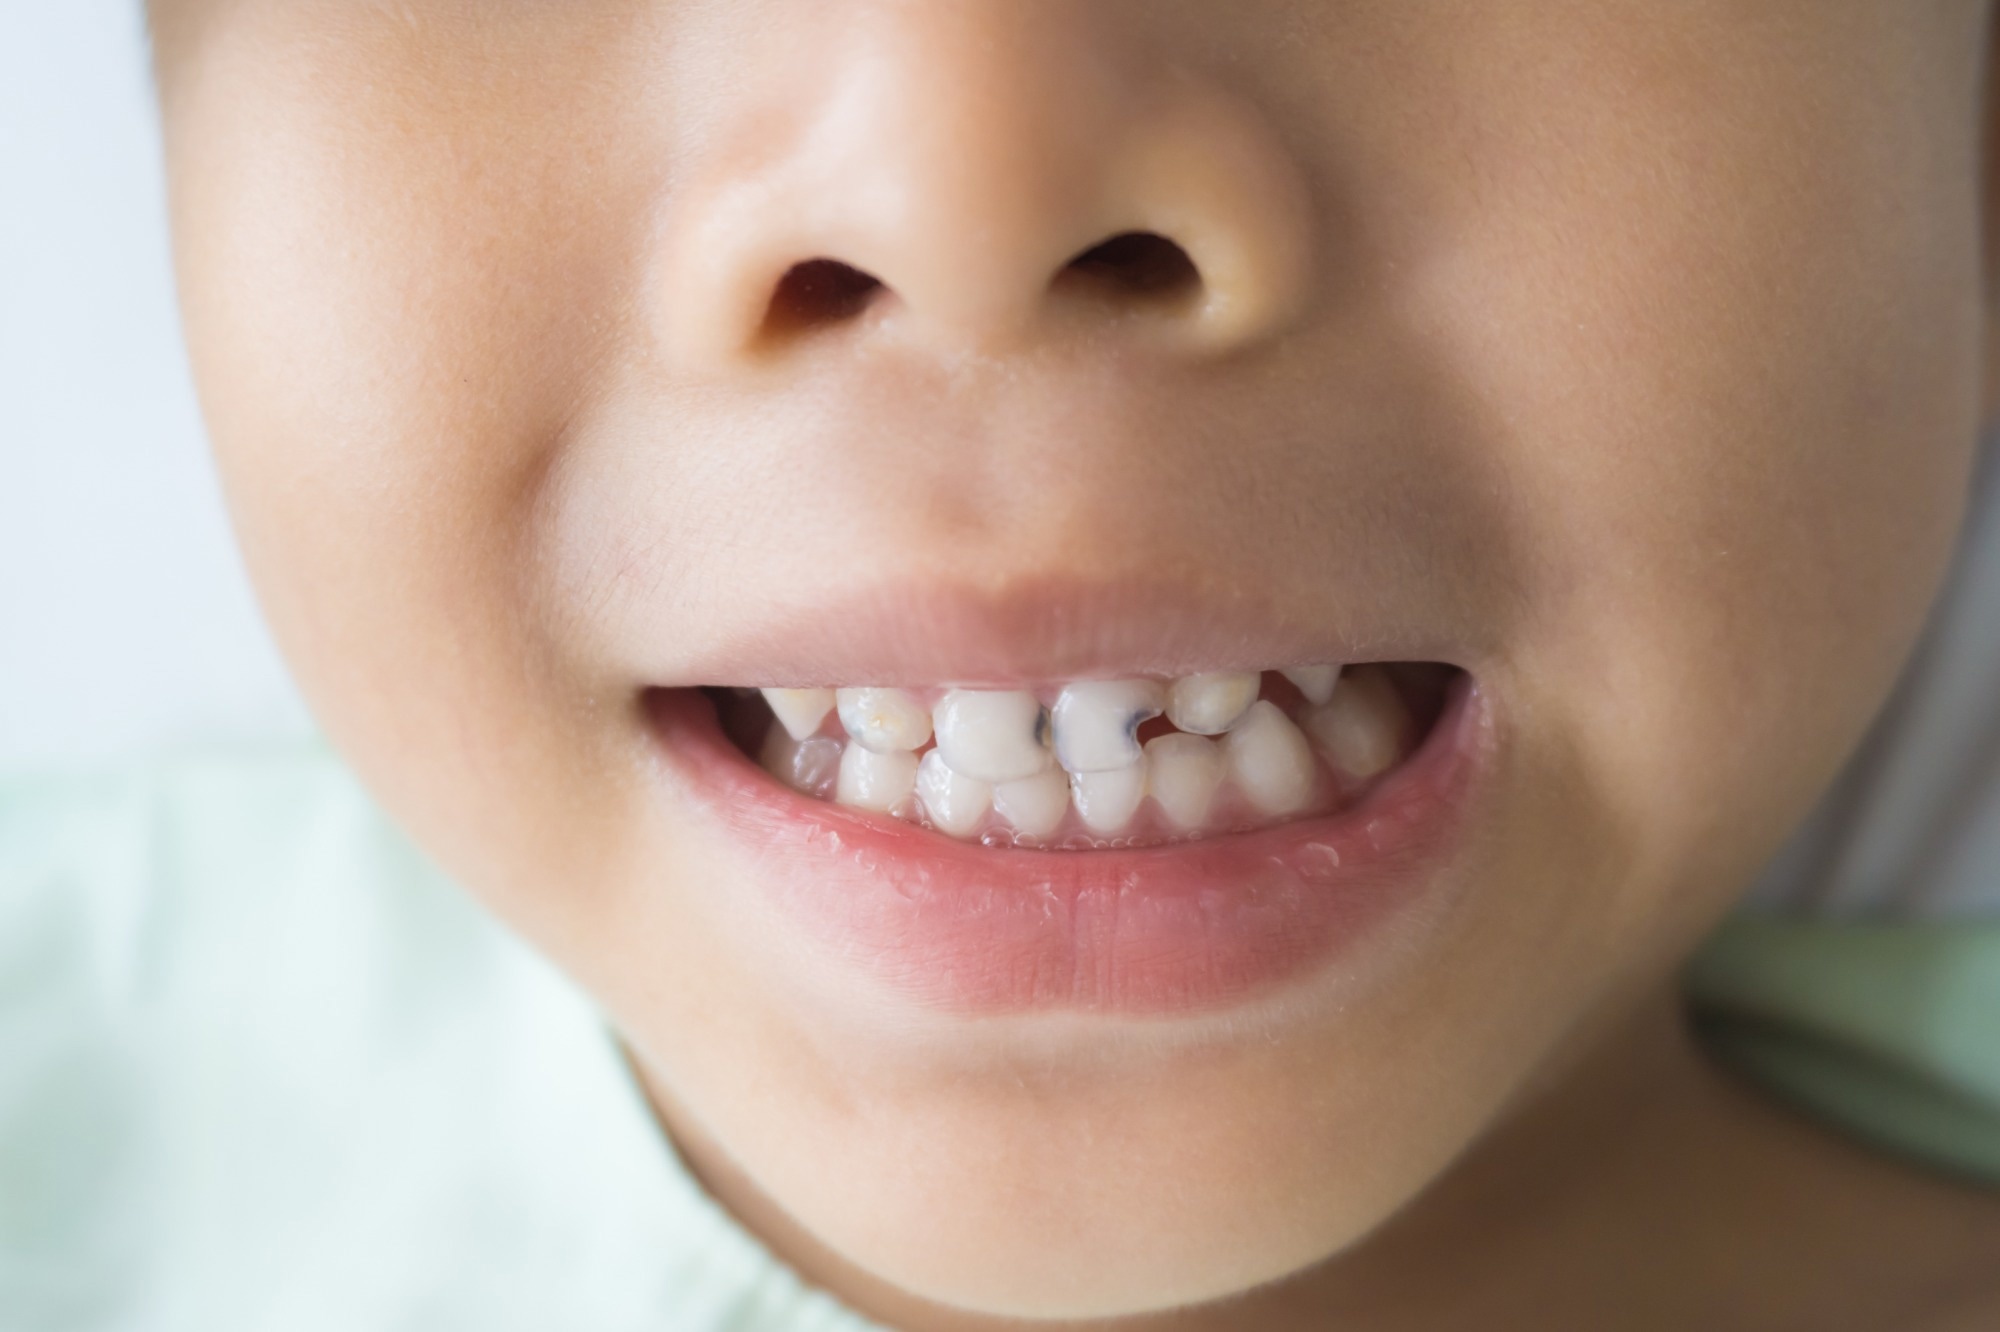 Study: The association between serum vitamin D status and dental caries or molar incisor hypomineralisation in 7–9-year-old Norwegian children: a cross-sectional study. Image Credit: modina/Shutterstock.com